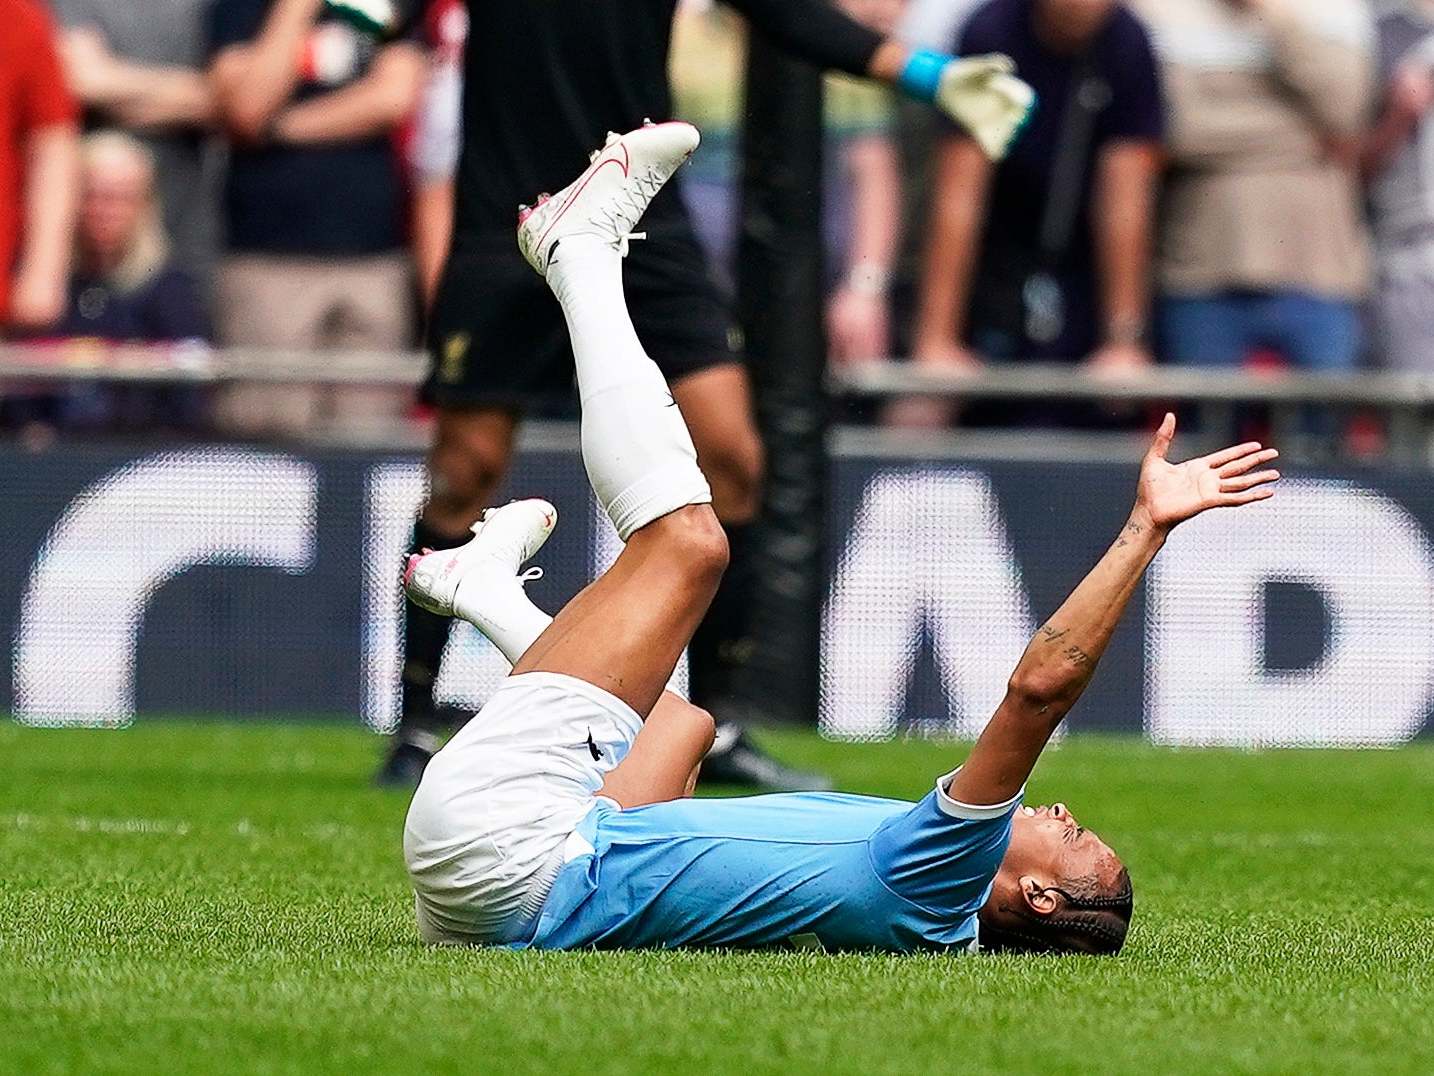 Leroy Sane injury: Man City confirm the worst with winger set to miss majority of season with knee injury